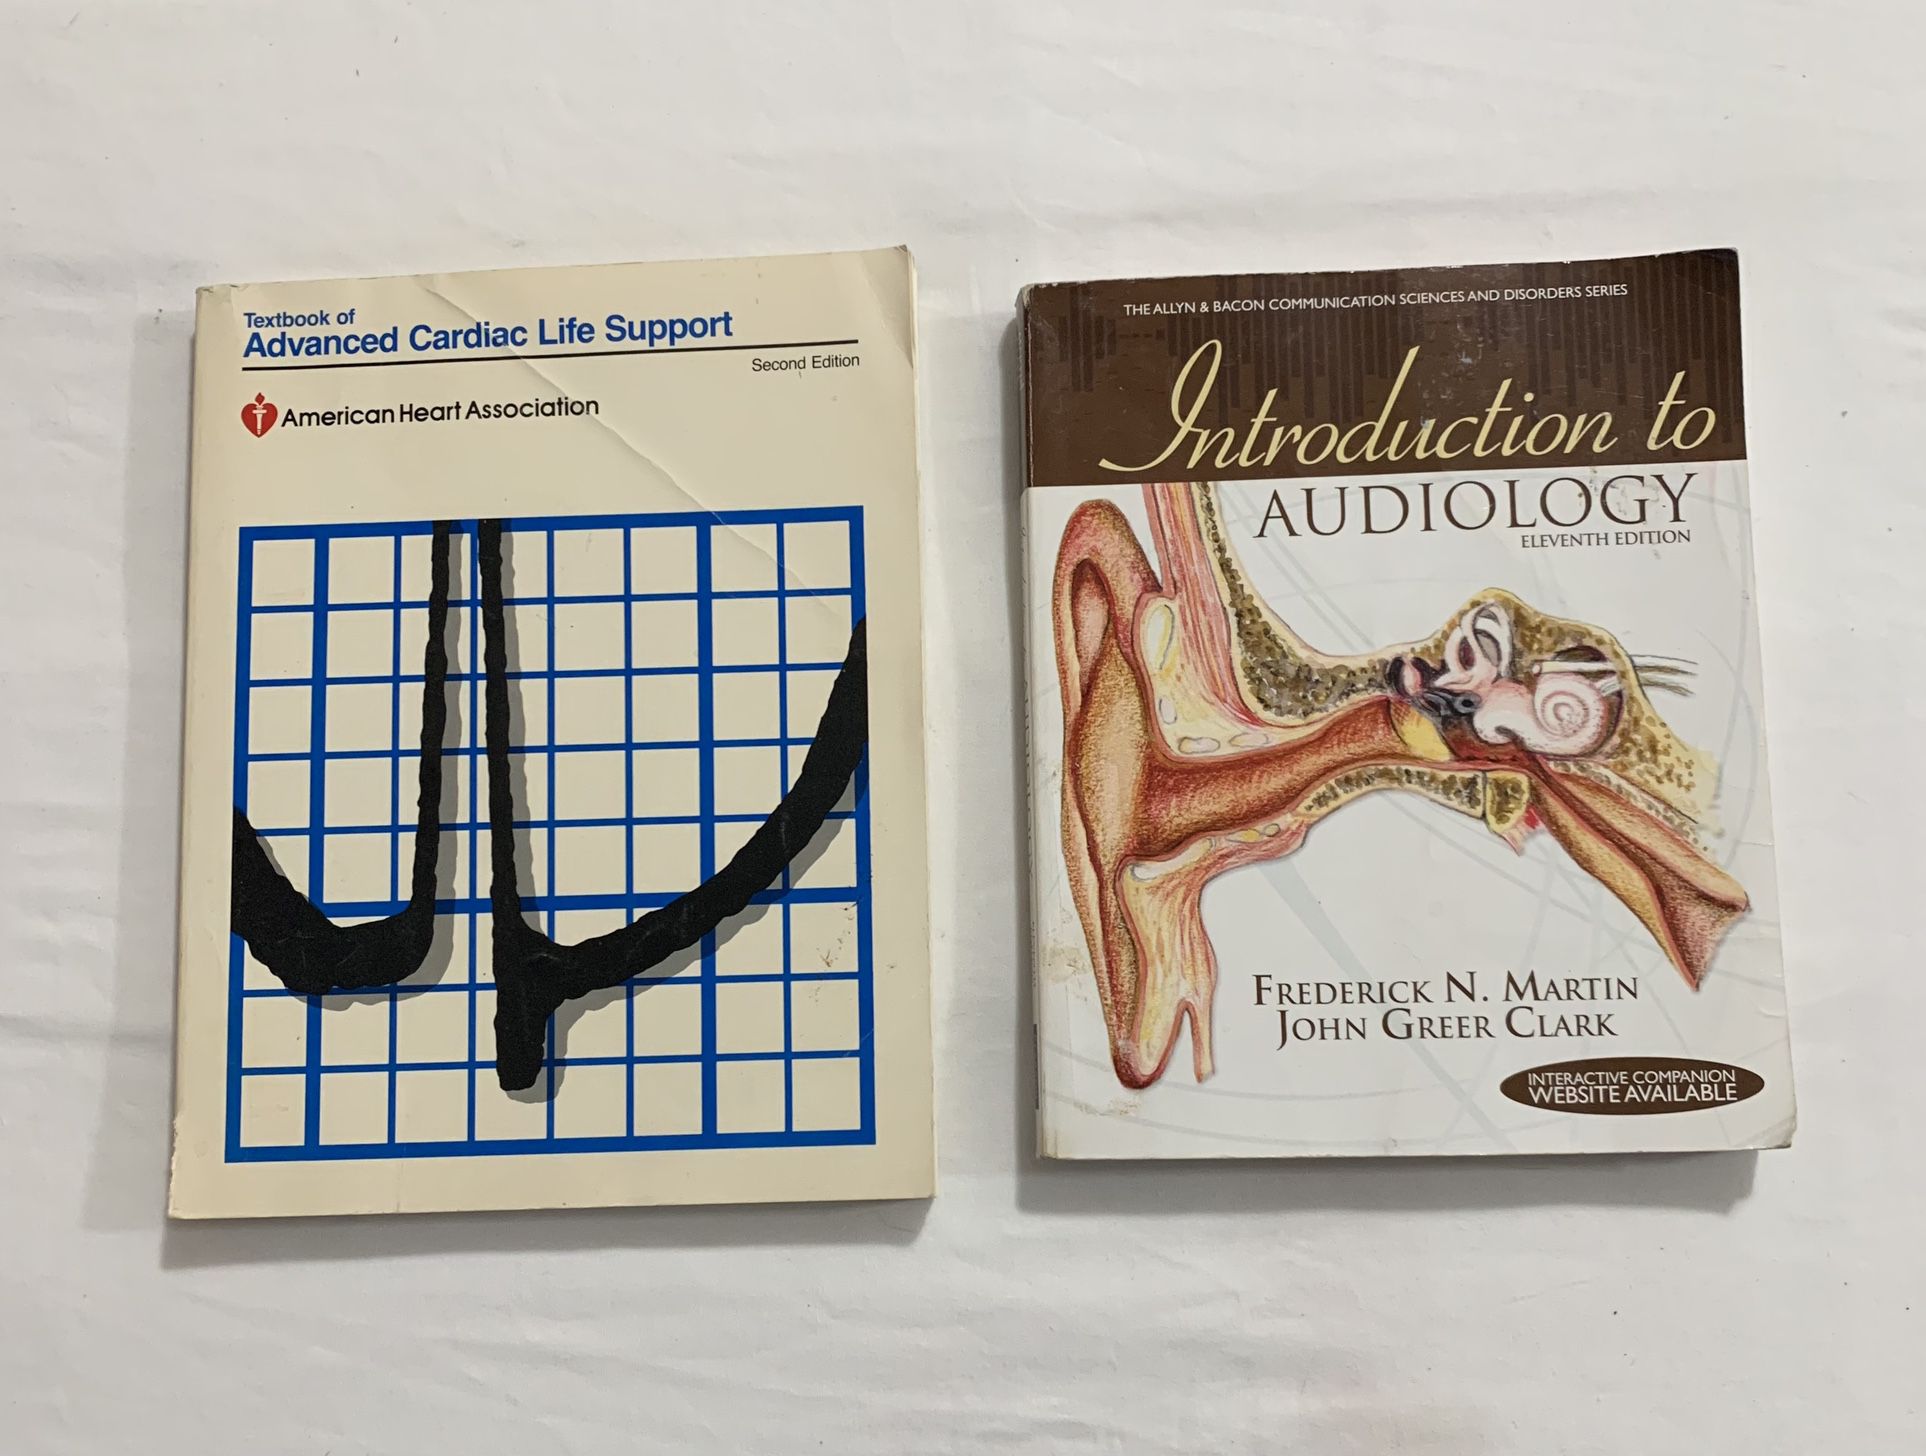 Textbook Of Advanced Cardiac Life Support & Introduction To Audiology